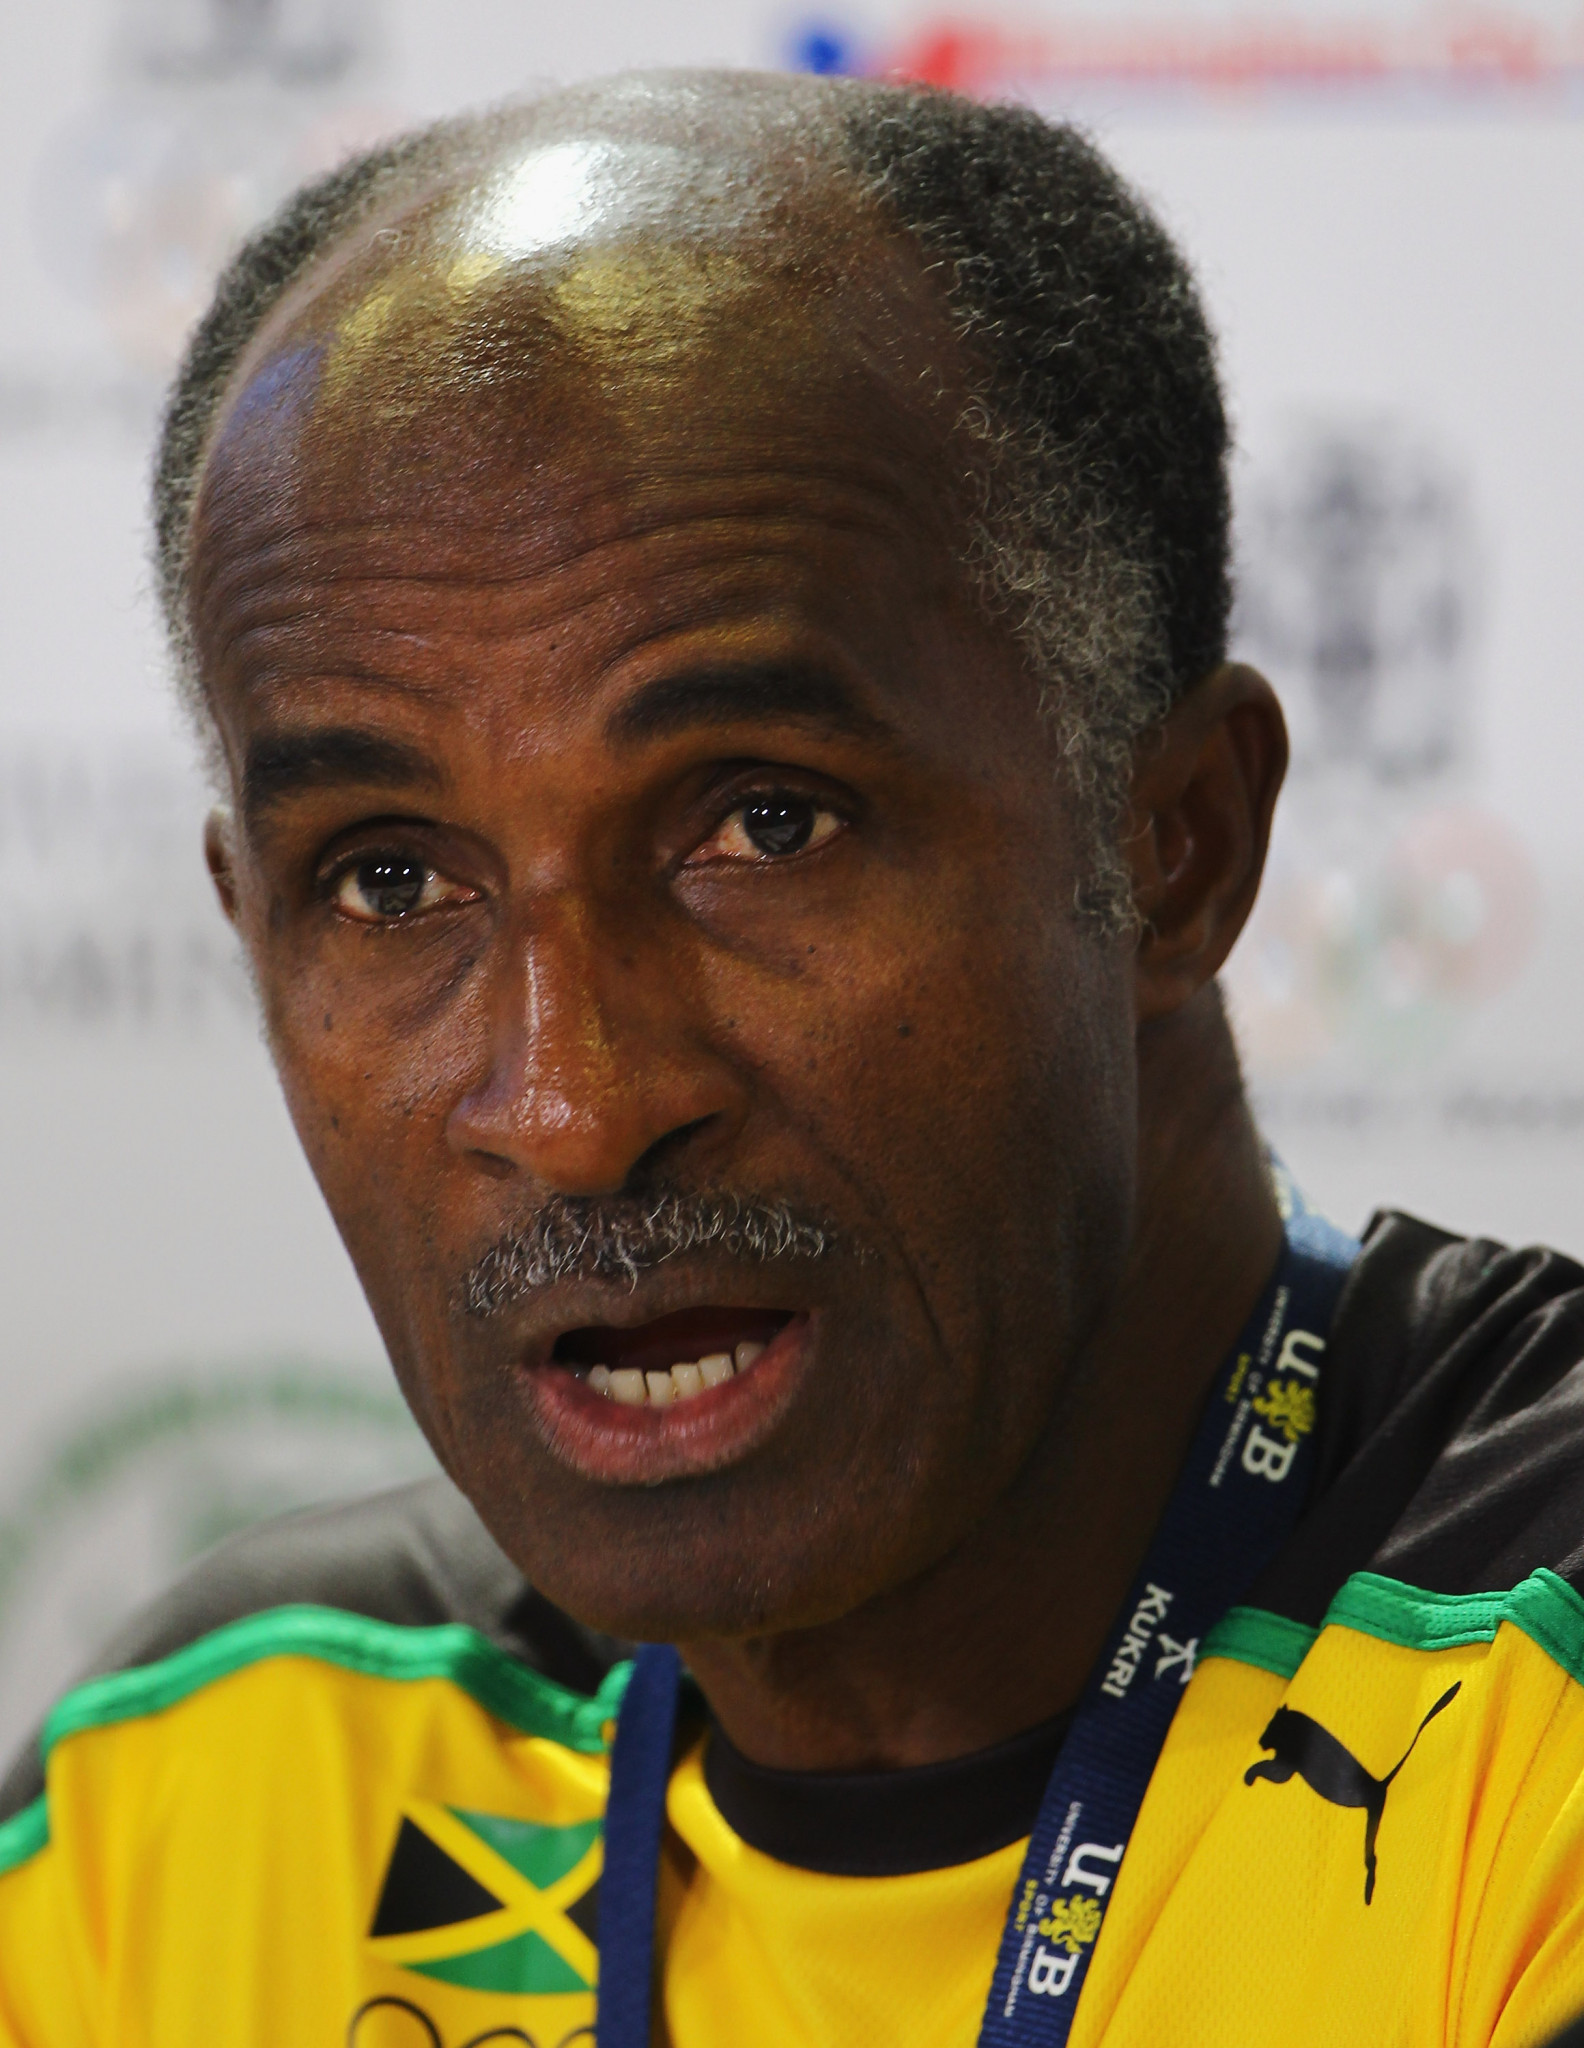 Don Quarrie, the 1976 Olympic 200 metres champion, is standing for election as new President of the Jamaica Athletics Administrative Association ©Getty Images